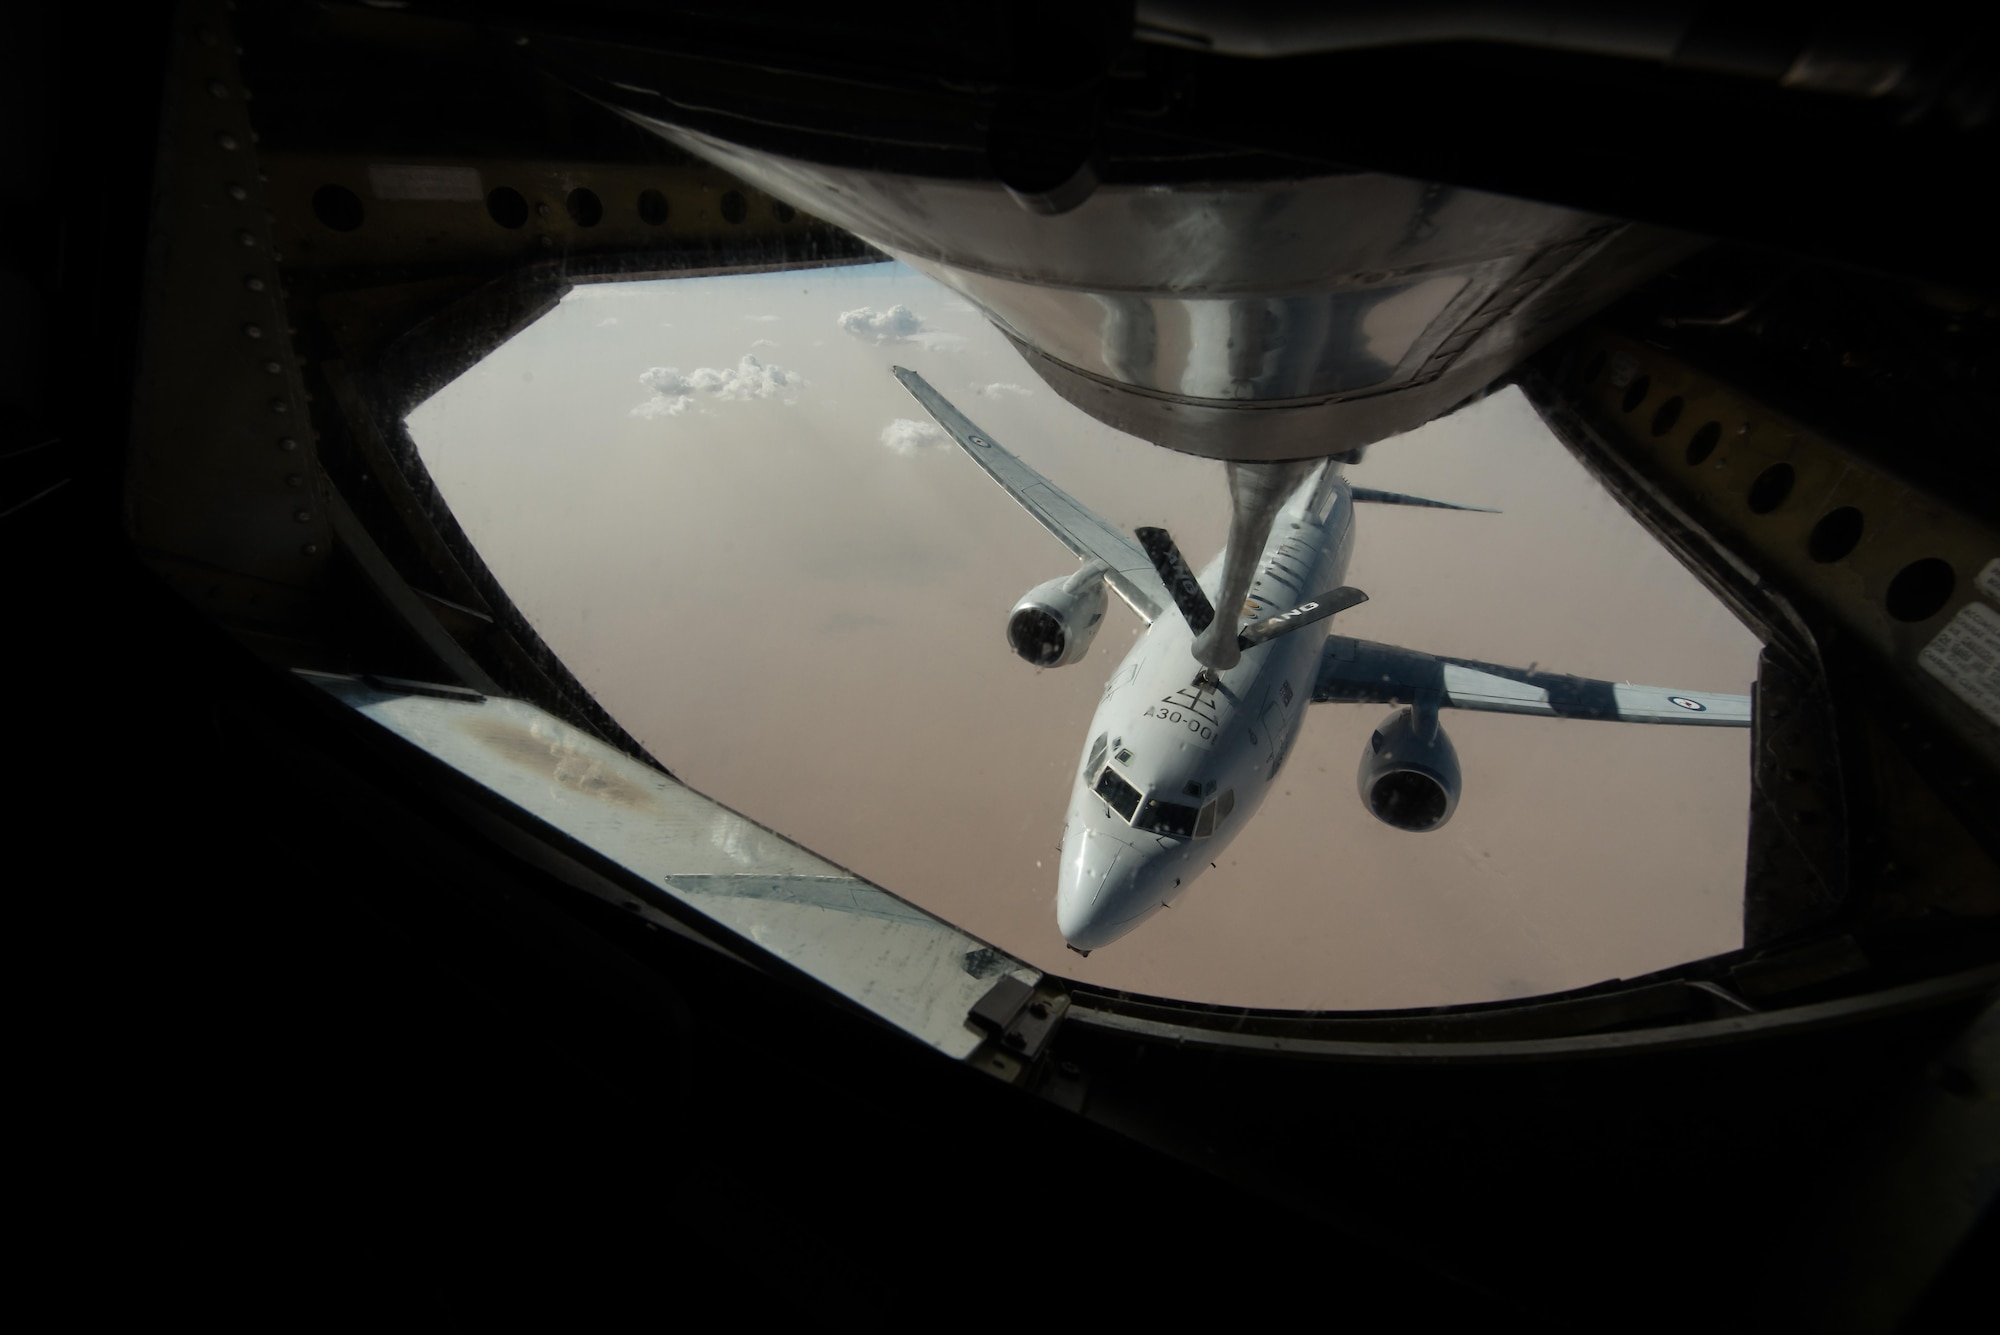 A Royal Australian Air Force E-7A Wedgetail receives fuel from an Air National Guard KC-135 Stratotanker that is deployed to the 340th Expeditionary Air Refueling Squadron at Al Udeid Air Base, Qatar over Iraq September 16, 2015. (U.S. Air Force photo/Staff Sgt. Alexandre Montes)  